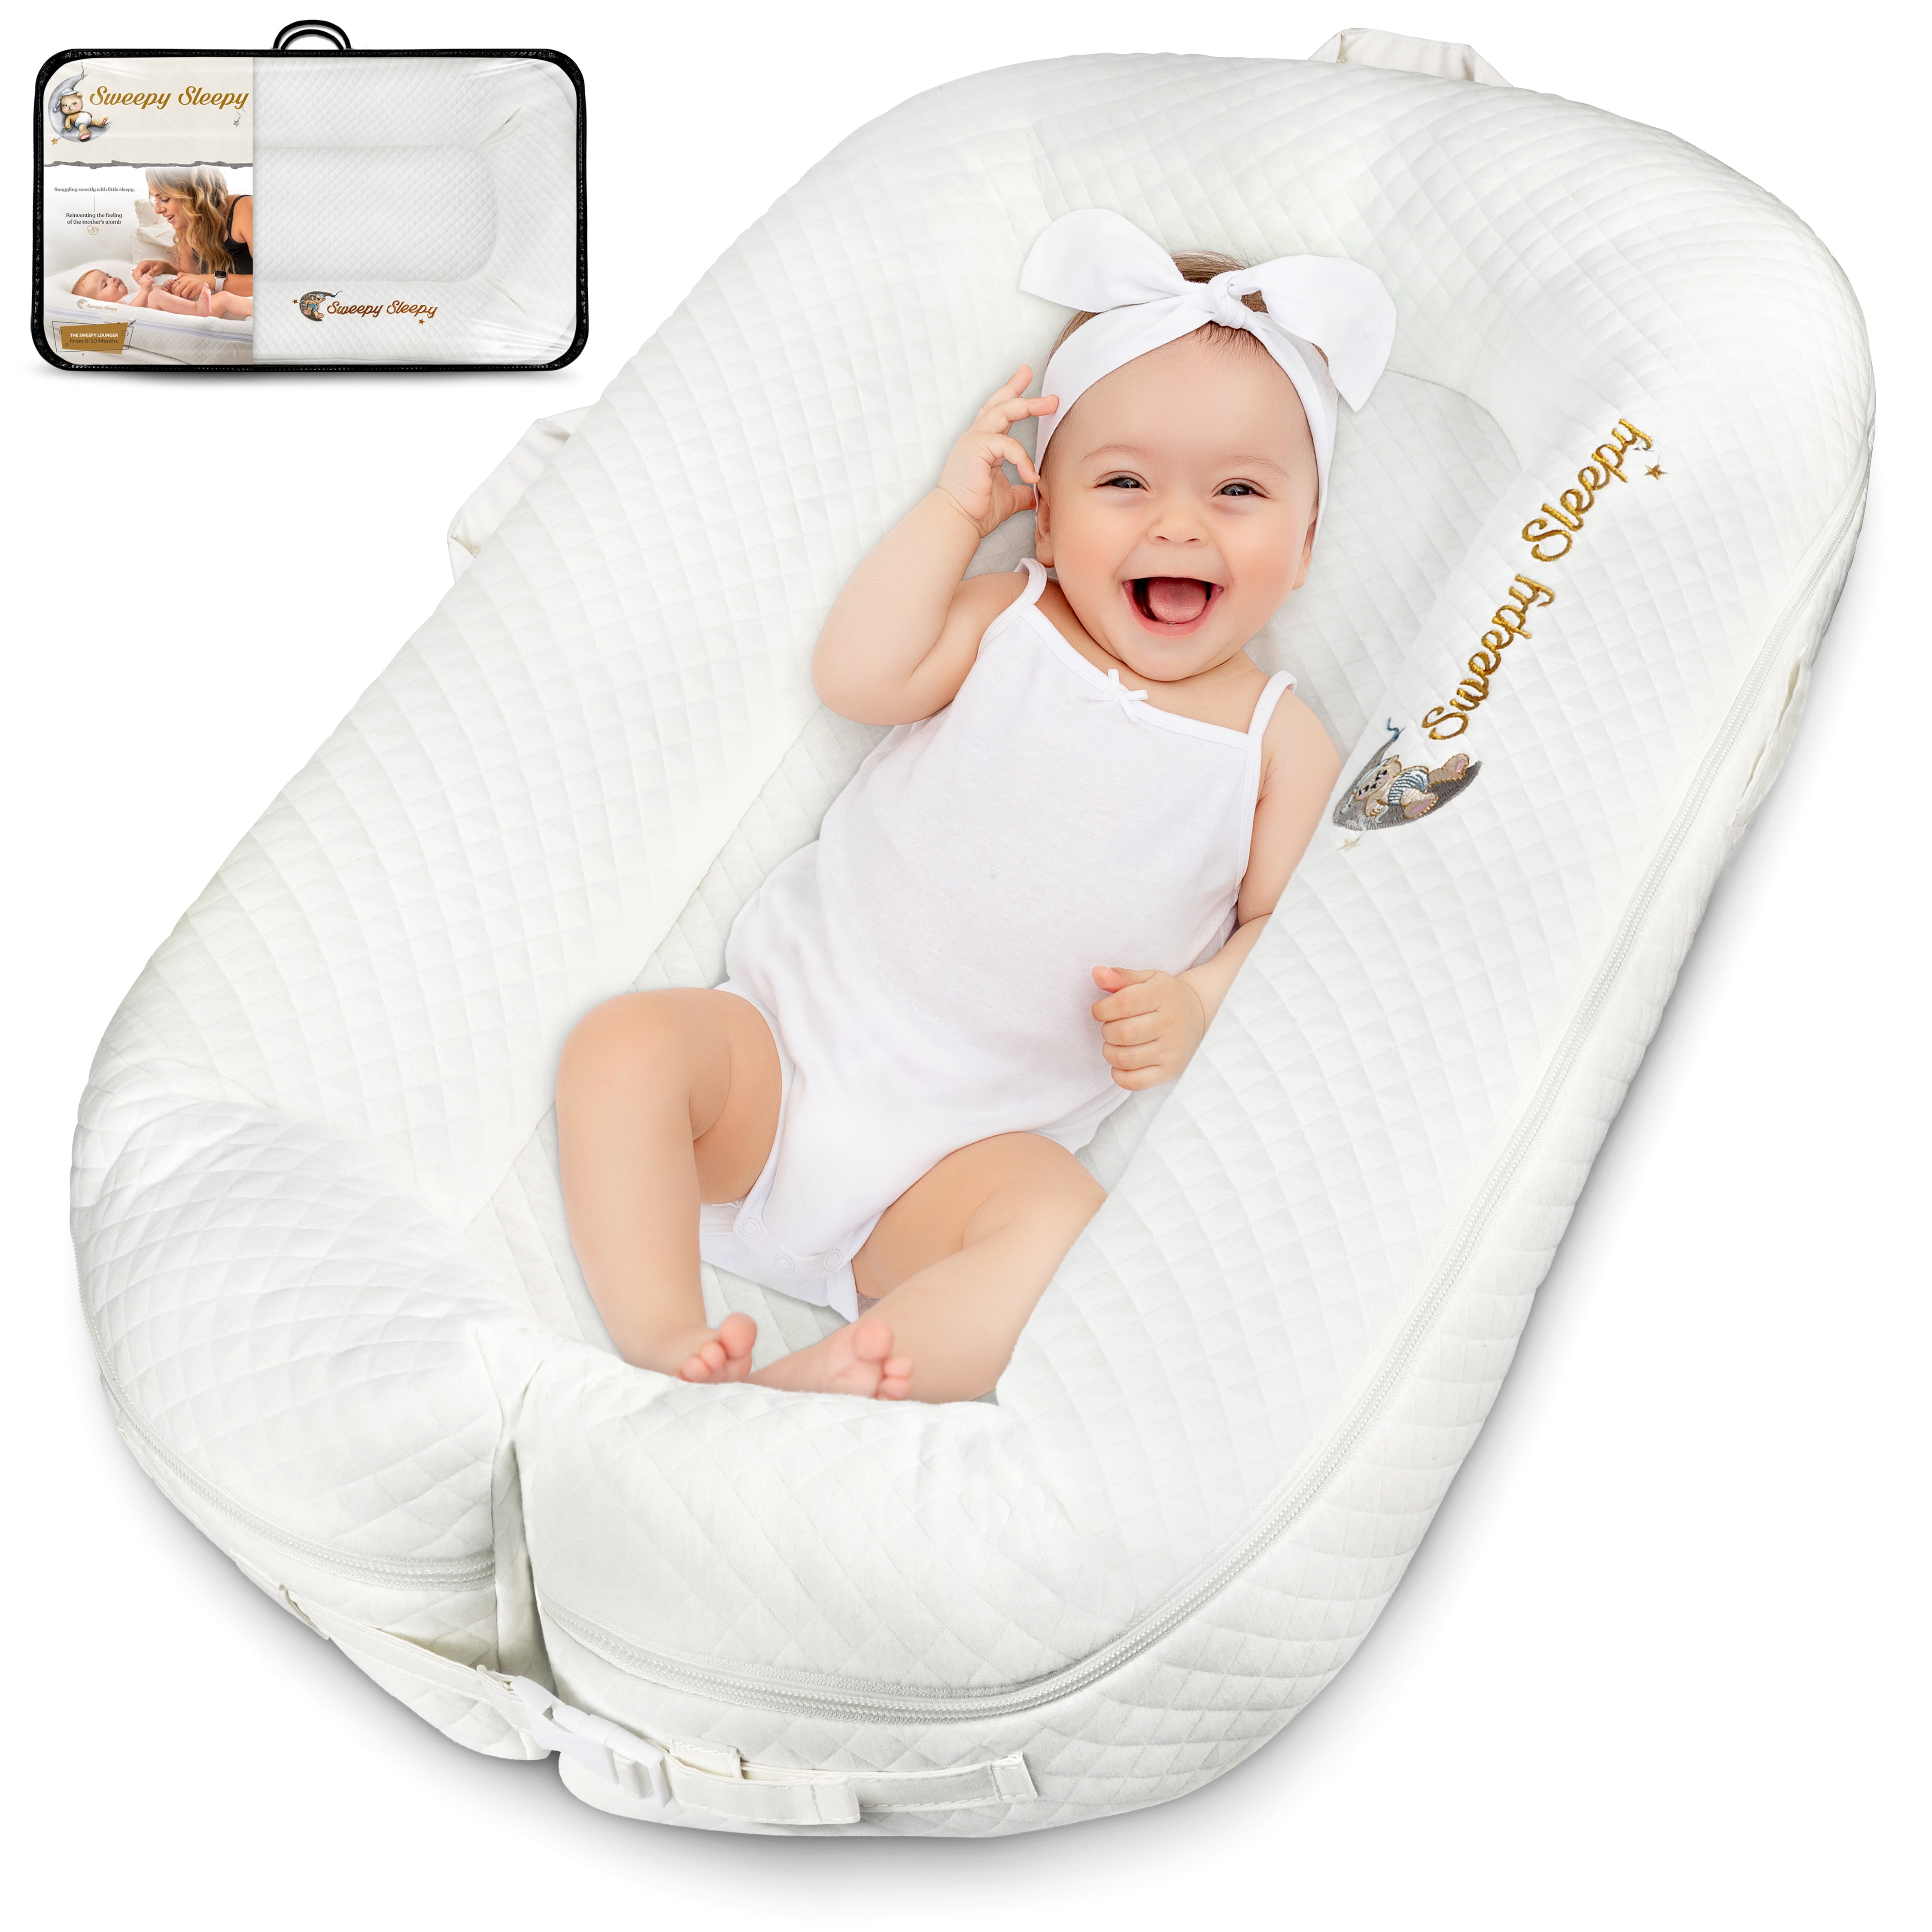 BabyCo Babynest 100% Cotton Travel Bed Baby Lunger Baby Positoner Baby Sleep Nest Sleep Bed Co Sleeper Removable Mattress Baby Nest Deluxe 